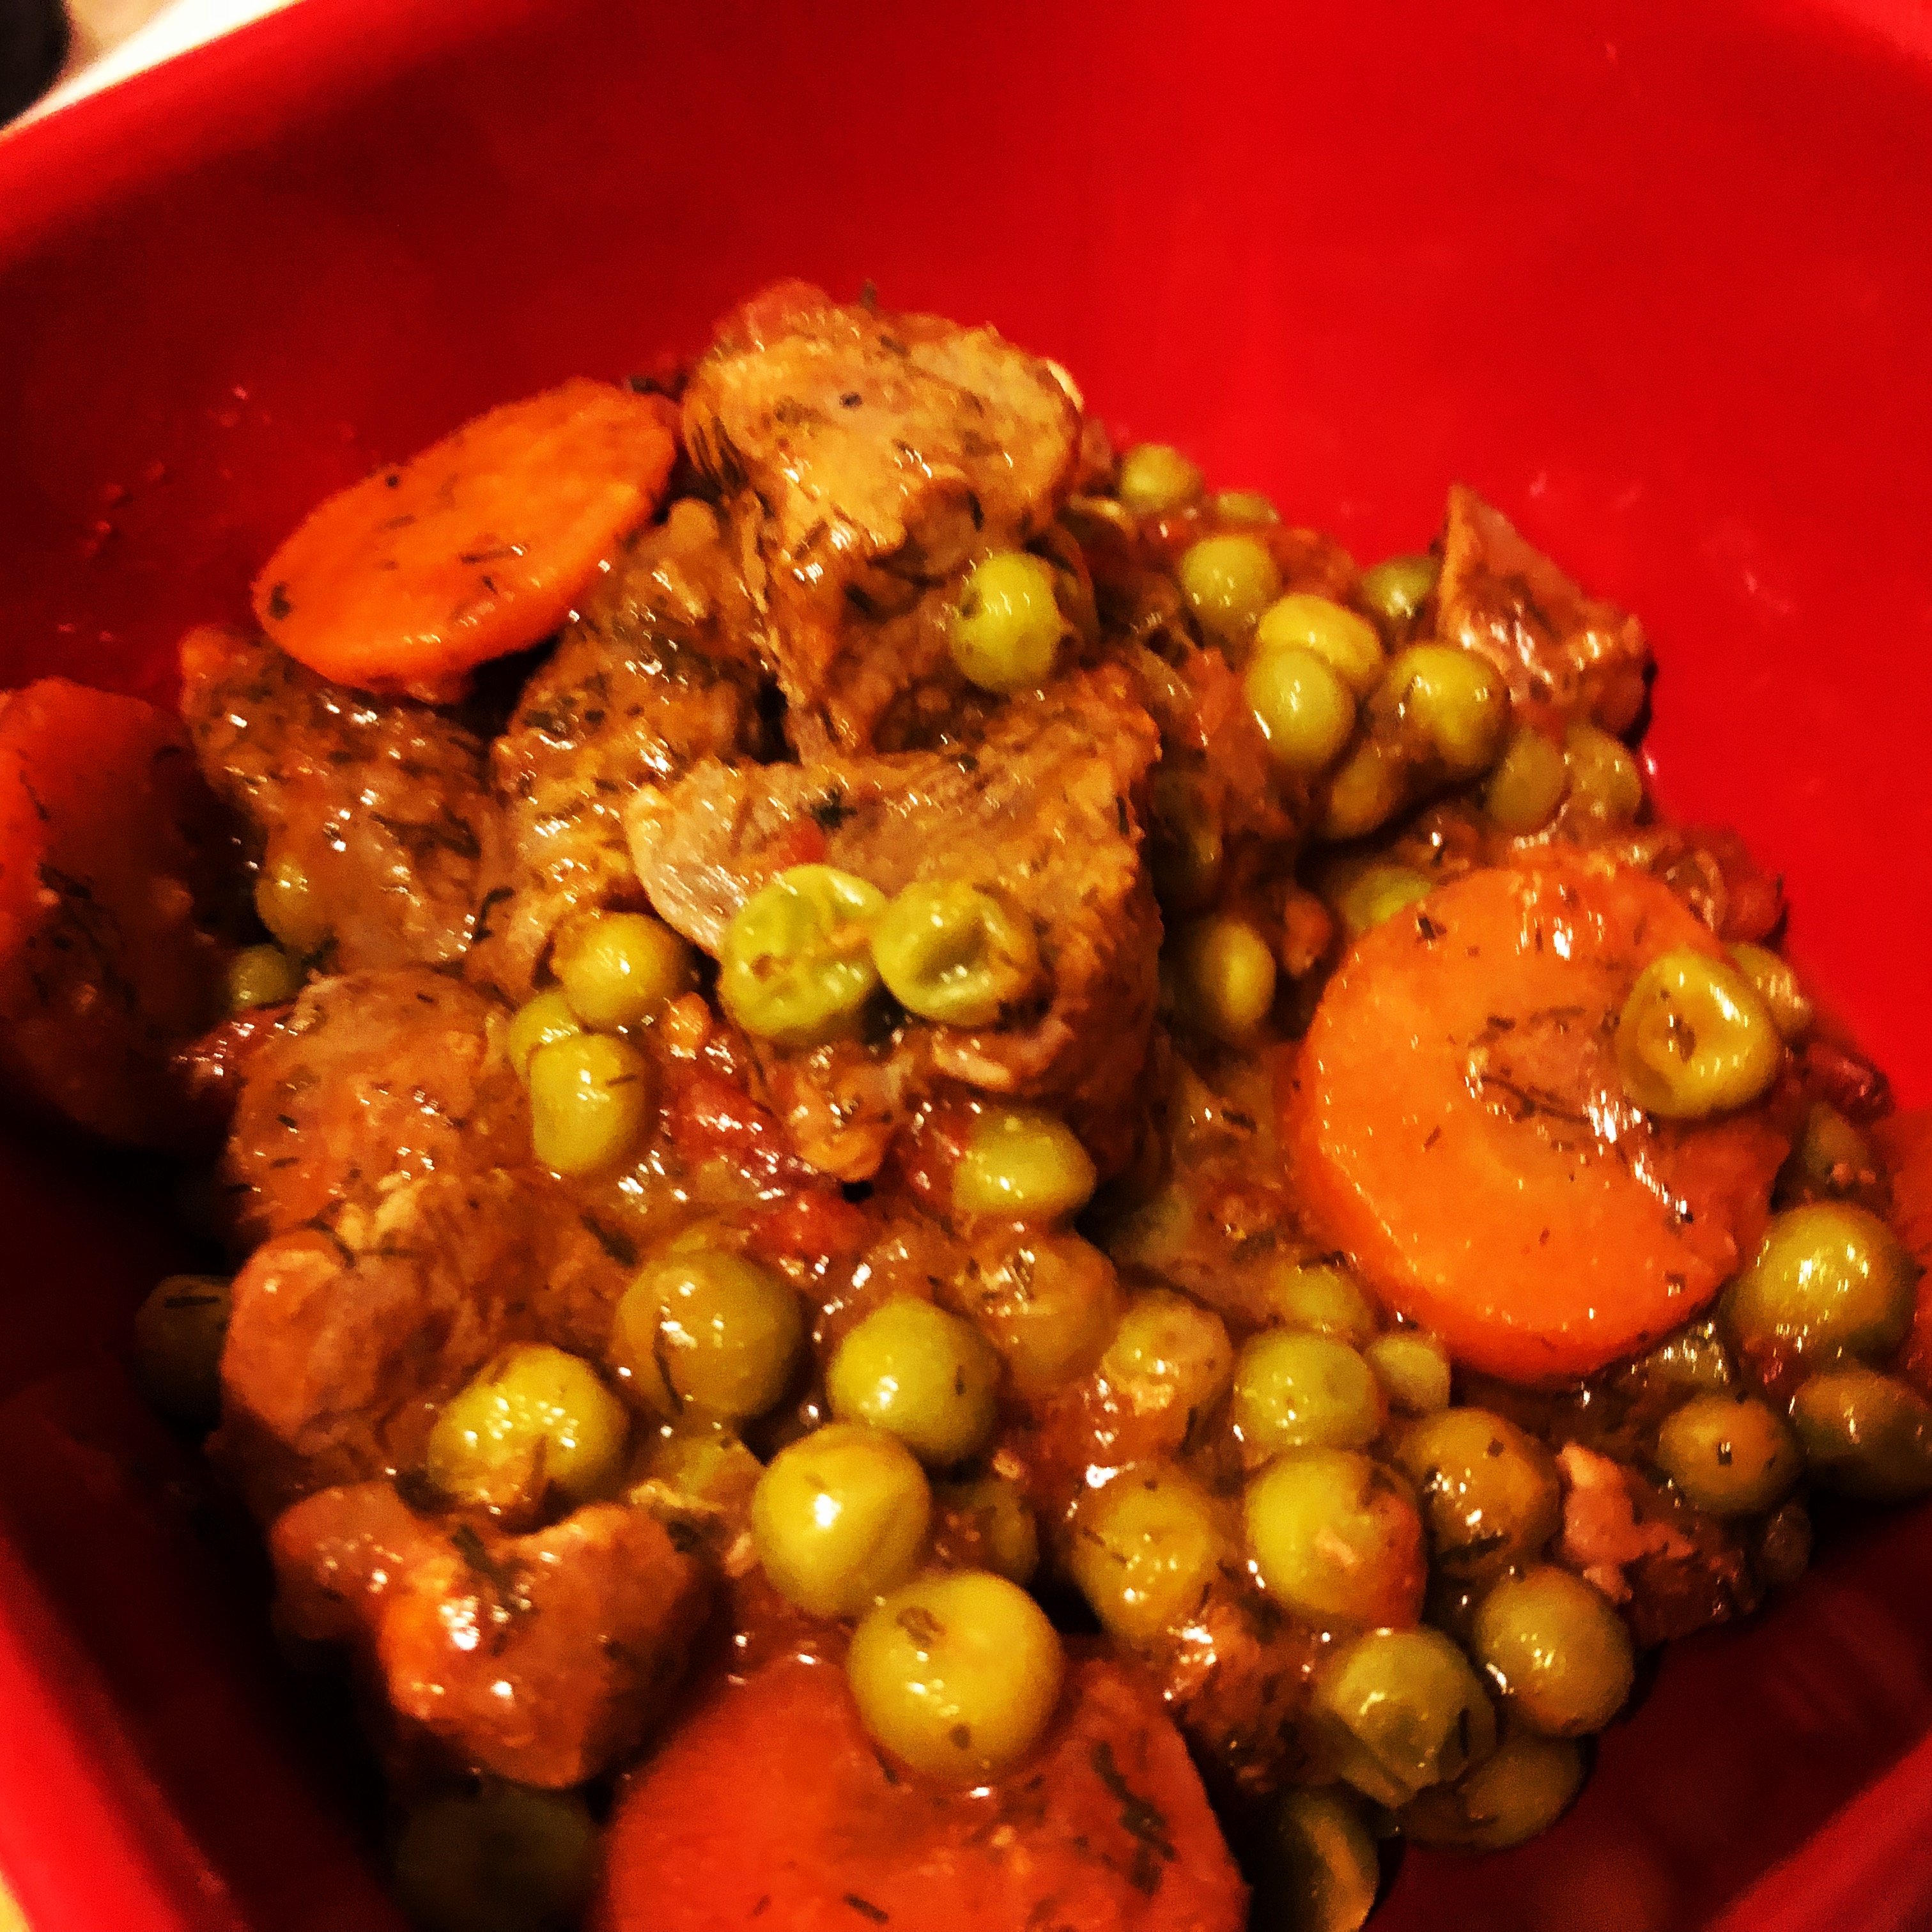 Beef Stew recipe with Green Peas